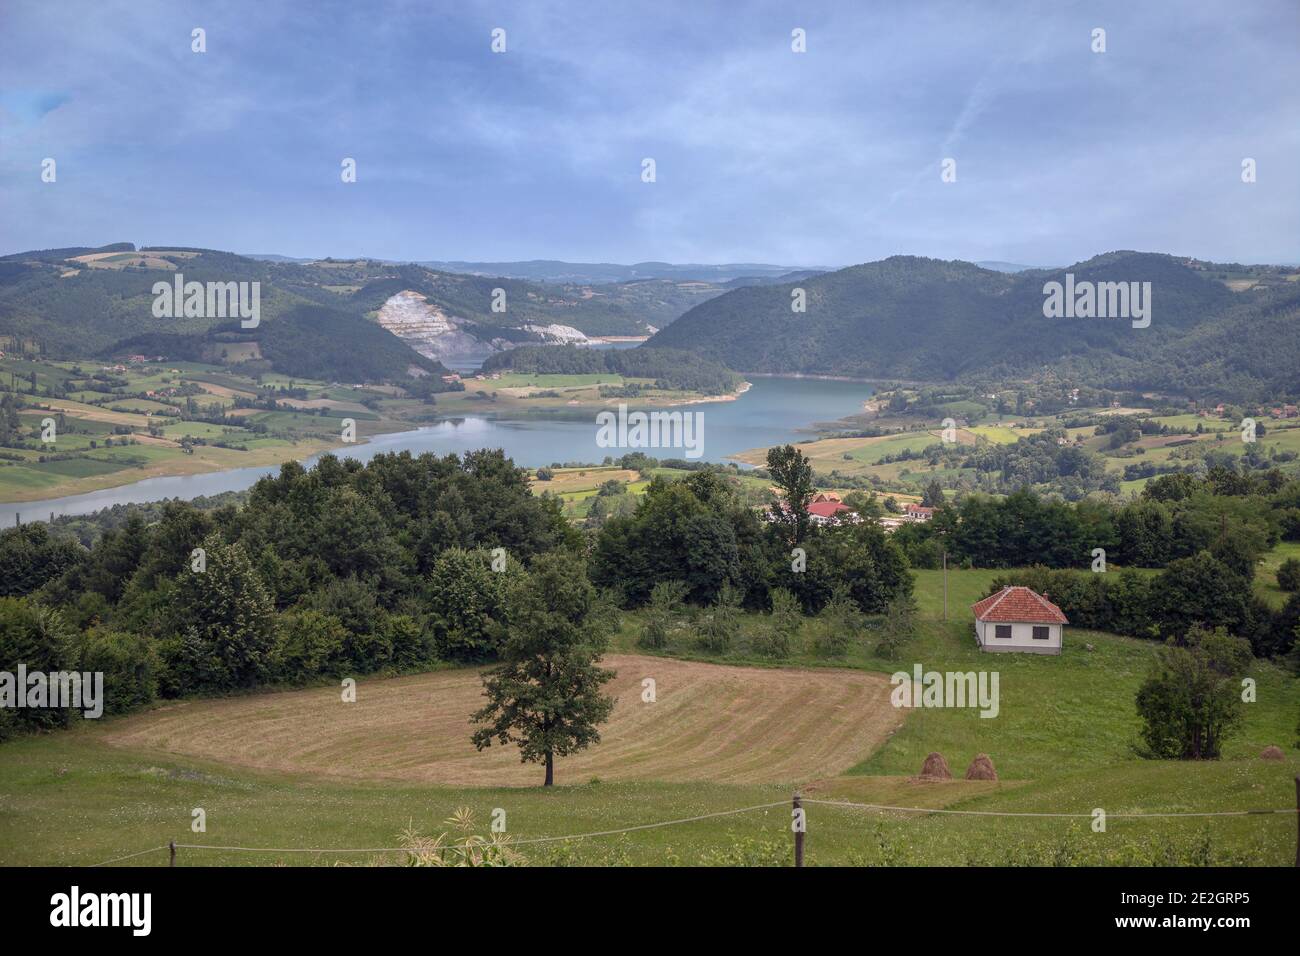 Serbia - Countryside landscape Stock Photo